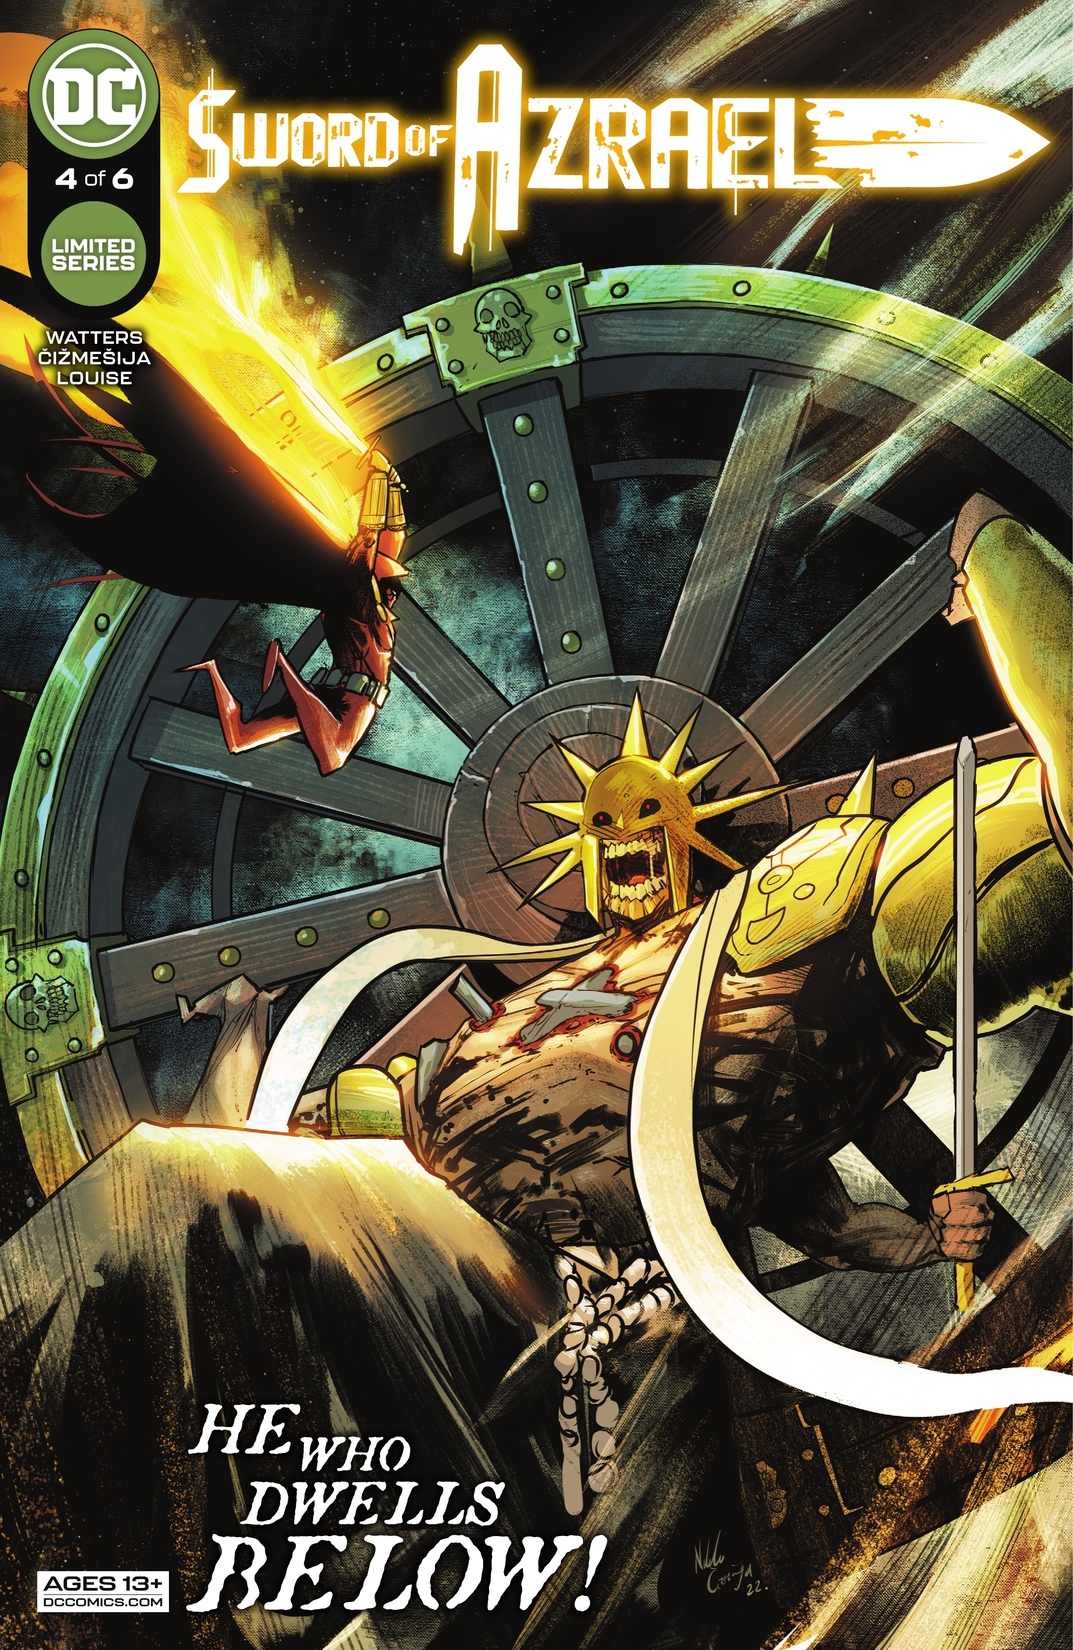 Sword of Azrael #4 preview images